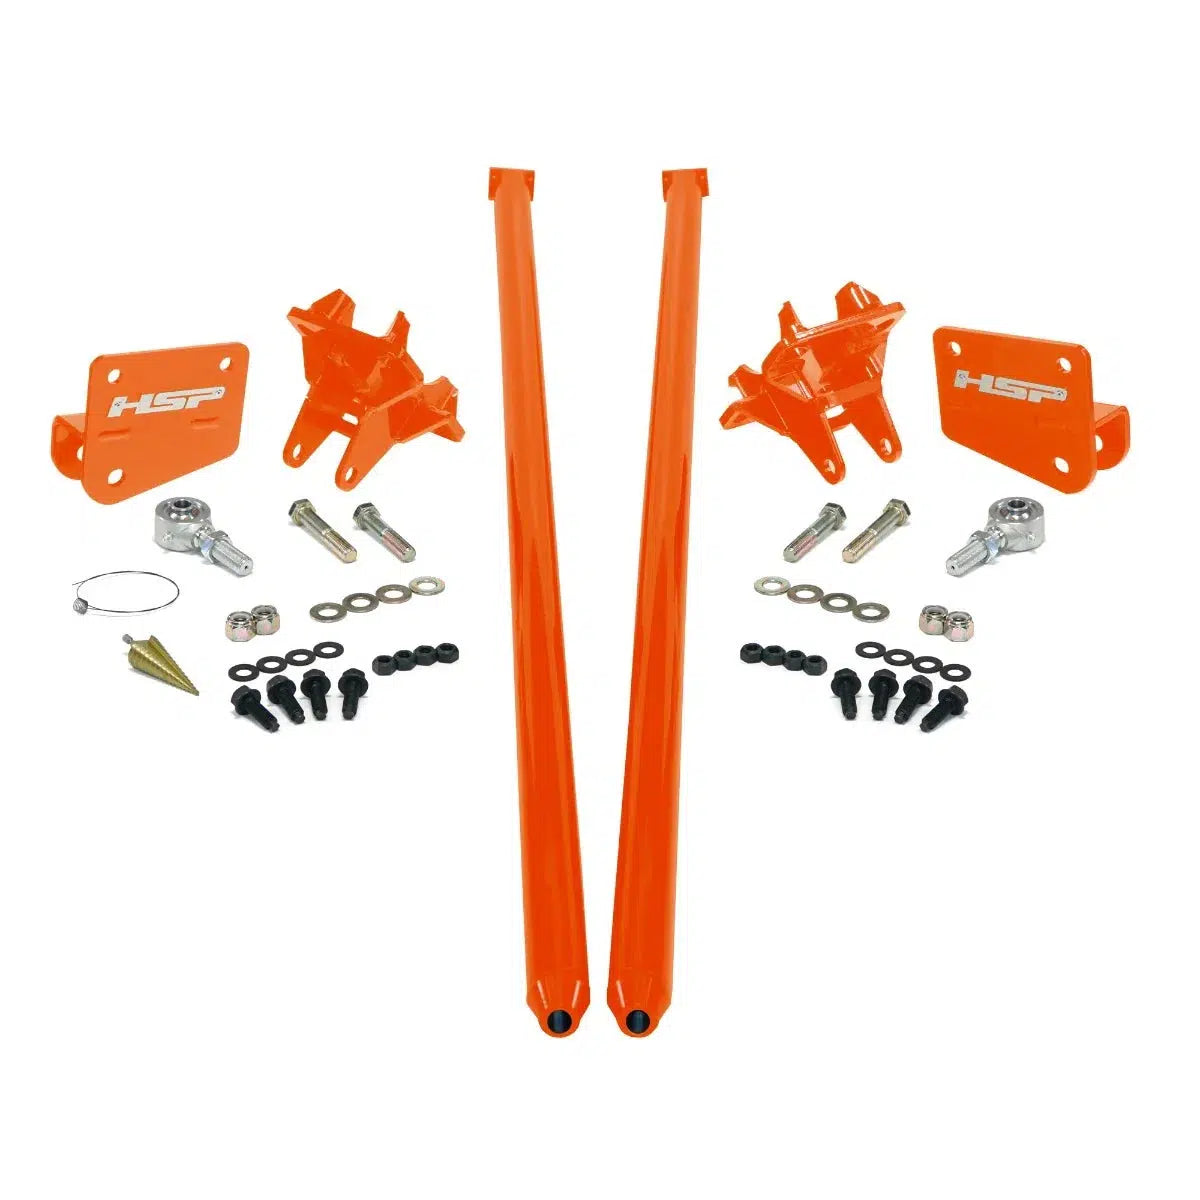 2011-2017 Powerstroke Traction Bars (CCLB) (HSP-P-435-2-4-HSP)-Traction Bars-HSP Diesel-HSP-P-435-2-4-HSP-O-Dirty Diesel Customs